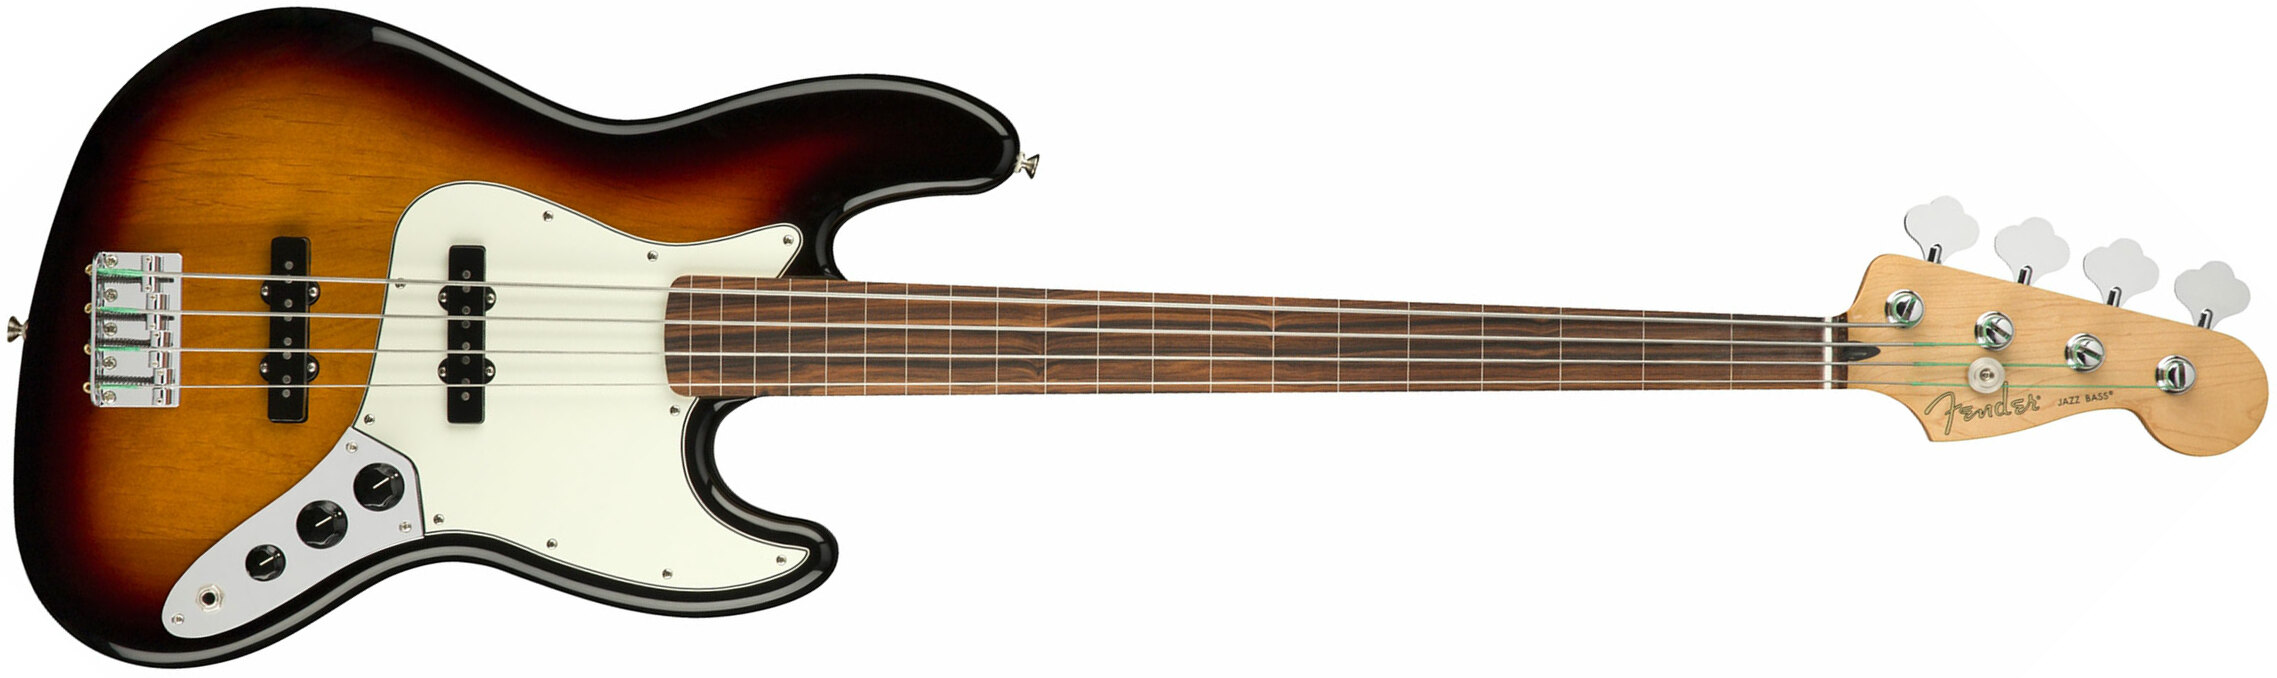 Fender Jazz Bass Player Fretless Mex Pf - 3-color Sunburst - Solid body electric bass - Main picture